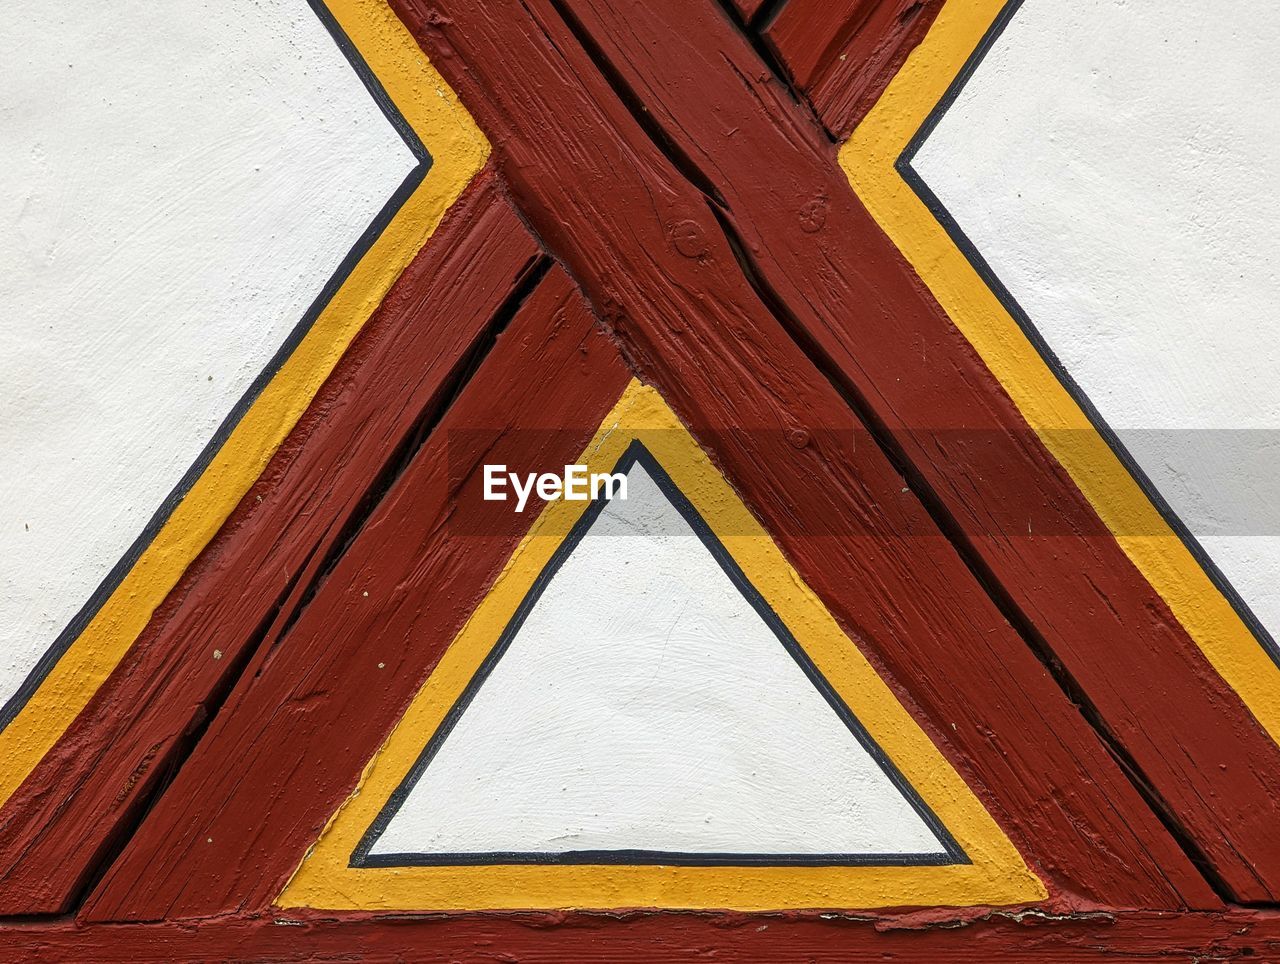 yellow, wood, no people, red, architecture, built structure, full frame, hardwood, floor, pattern, shape, day, wall - building feature, close-up, backgrounds, window, building exterior, textured, geometric shape, wood stain, outdoors, wall, multi colored, brown, flooring